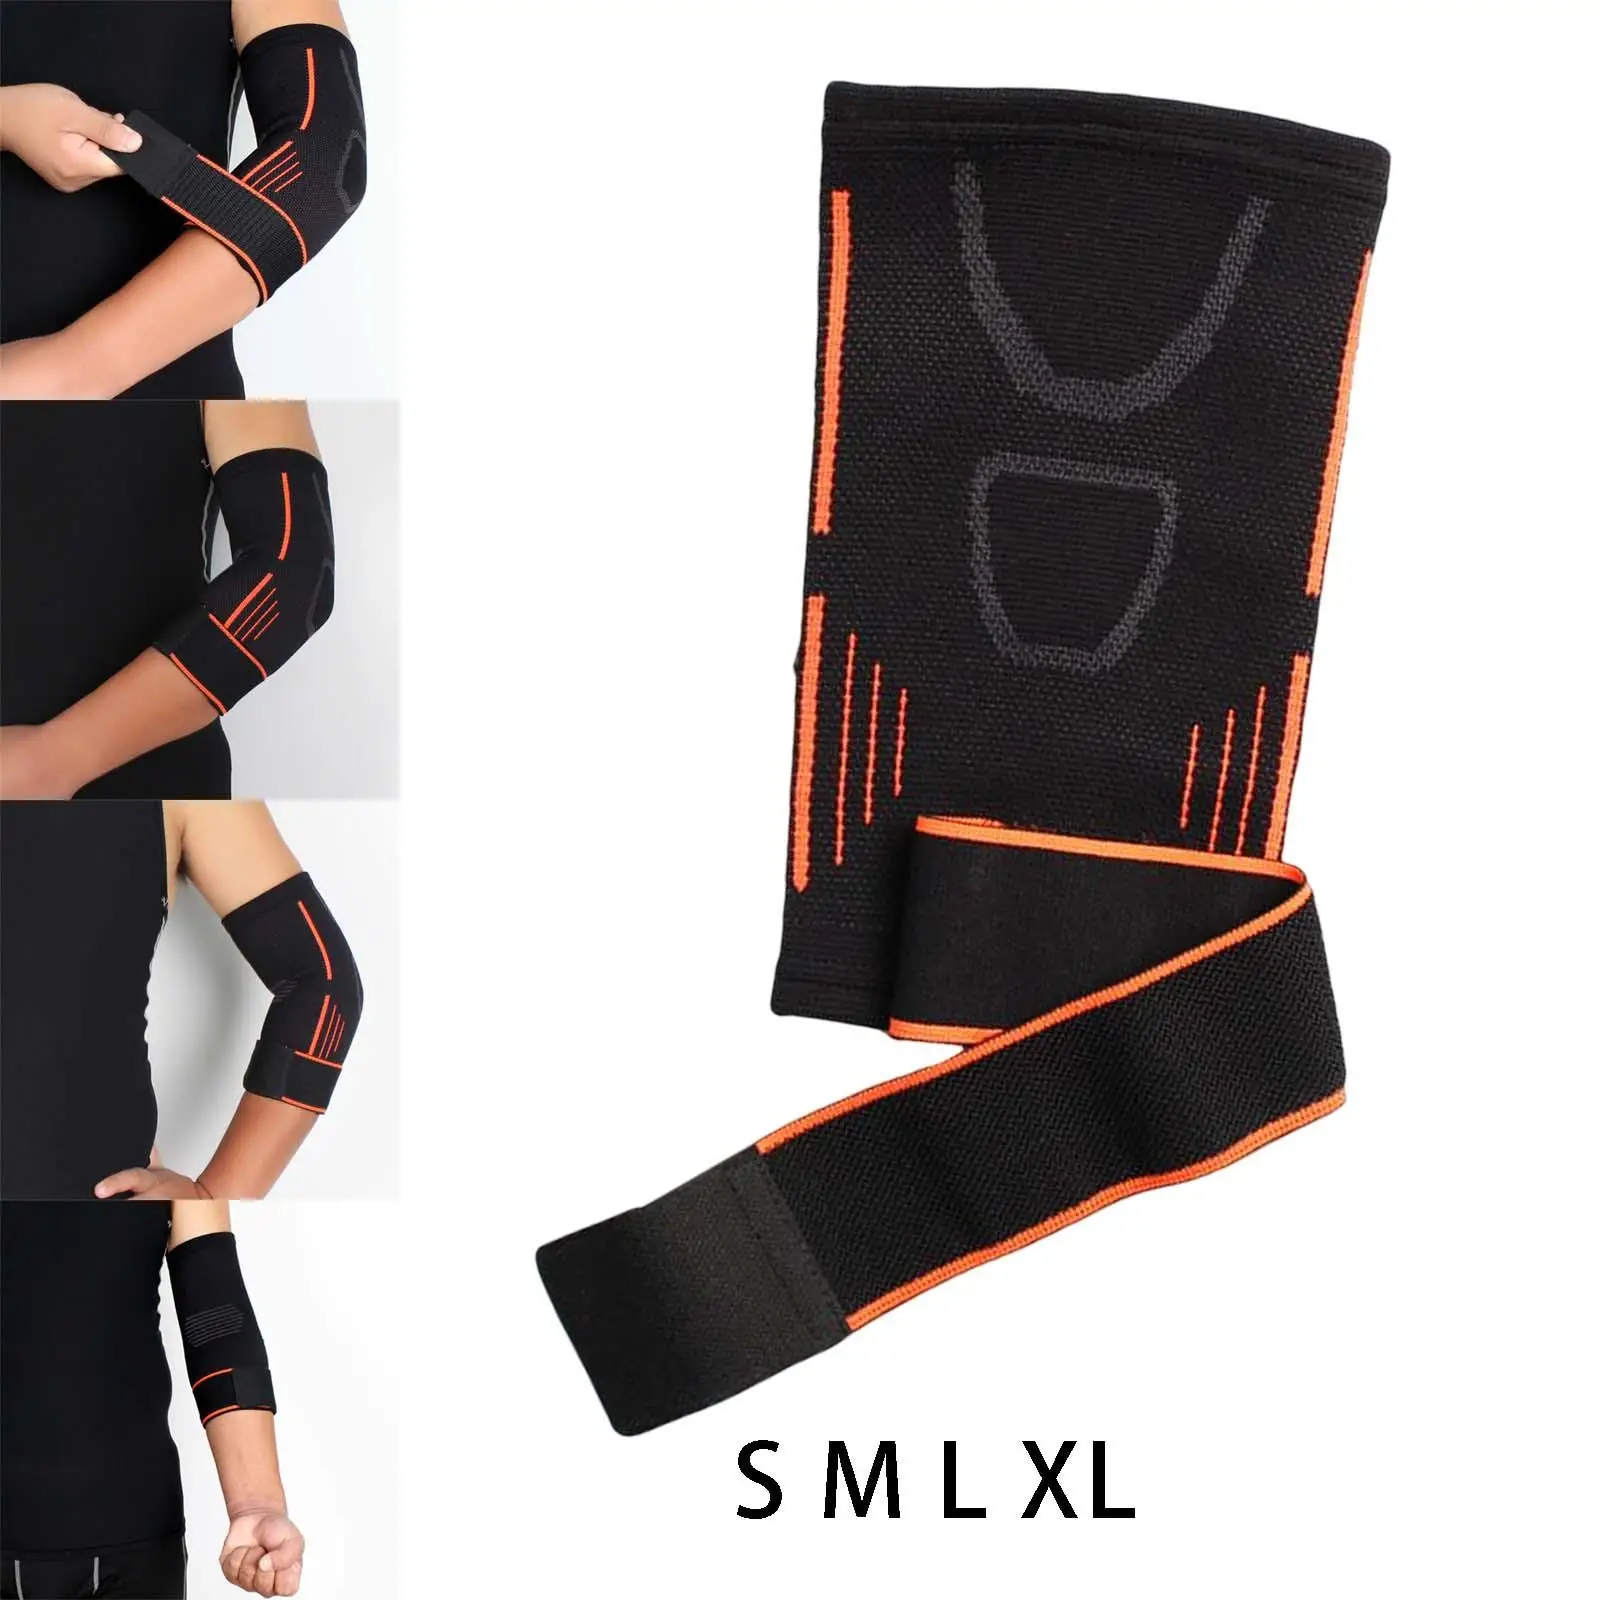 Compression Sleeve Arms Support Wrap Sports Protection Forearm Crashproof Elbow Brace Gym, Sport Tennis Football Baseball